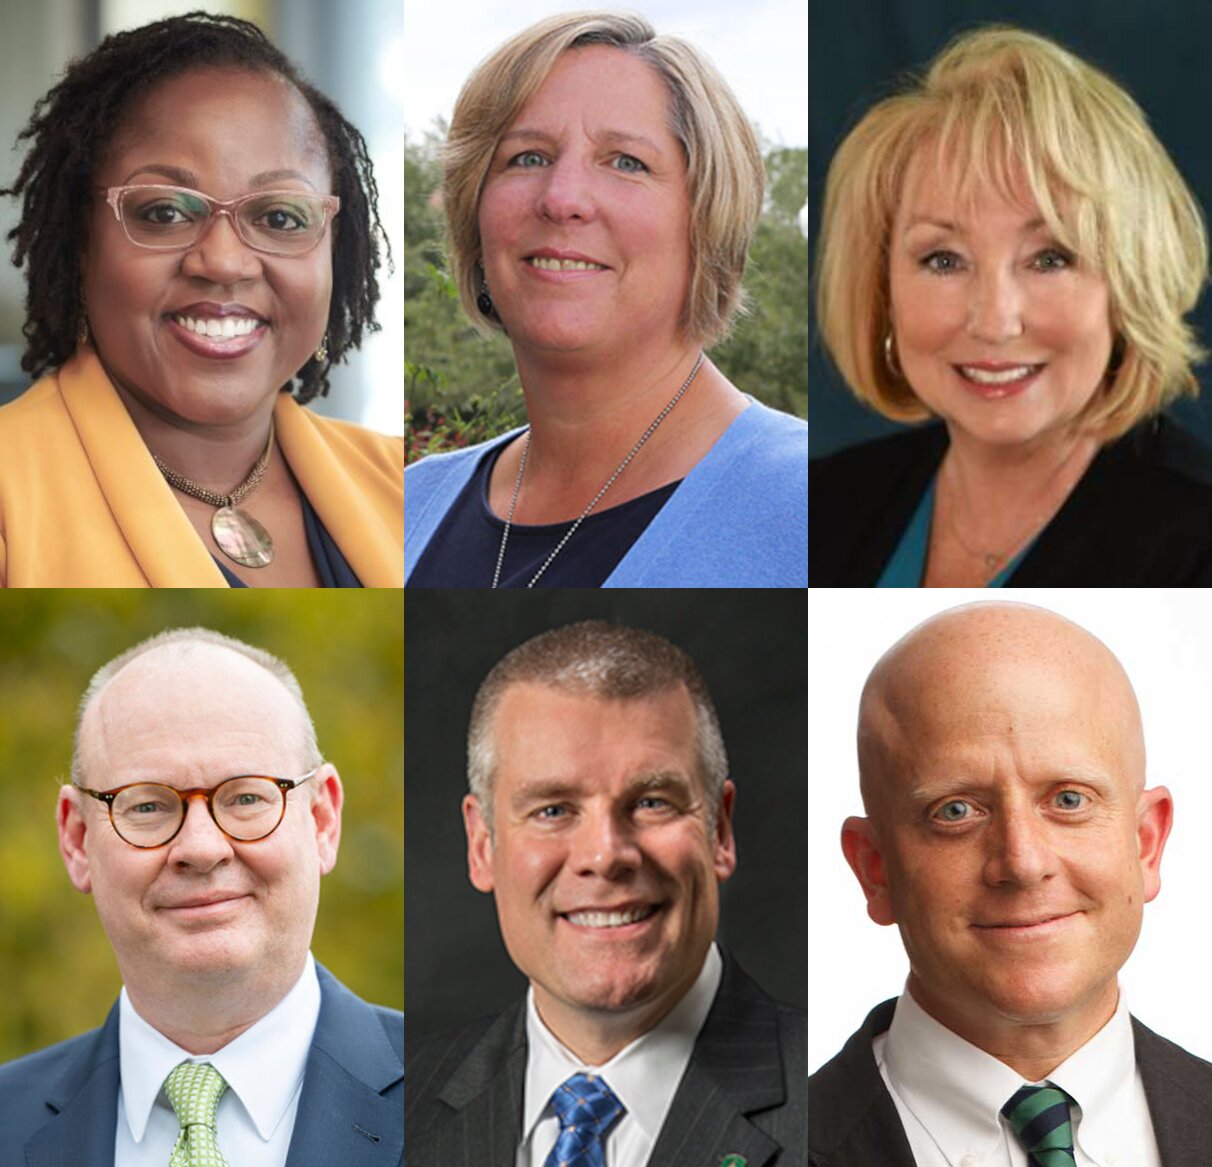 Six candidates are looking to be the next president at SUNY Potsdam. In the top row, from the left, are Dr. Shelitha Williams, Dr. Suzanne Smith and Dr. Irene Rios. In the bottom row are Dr. Patrick Jones, Dr. Edward Mills and Dr. Jody Fournier.